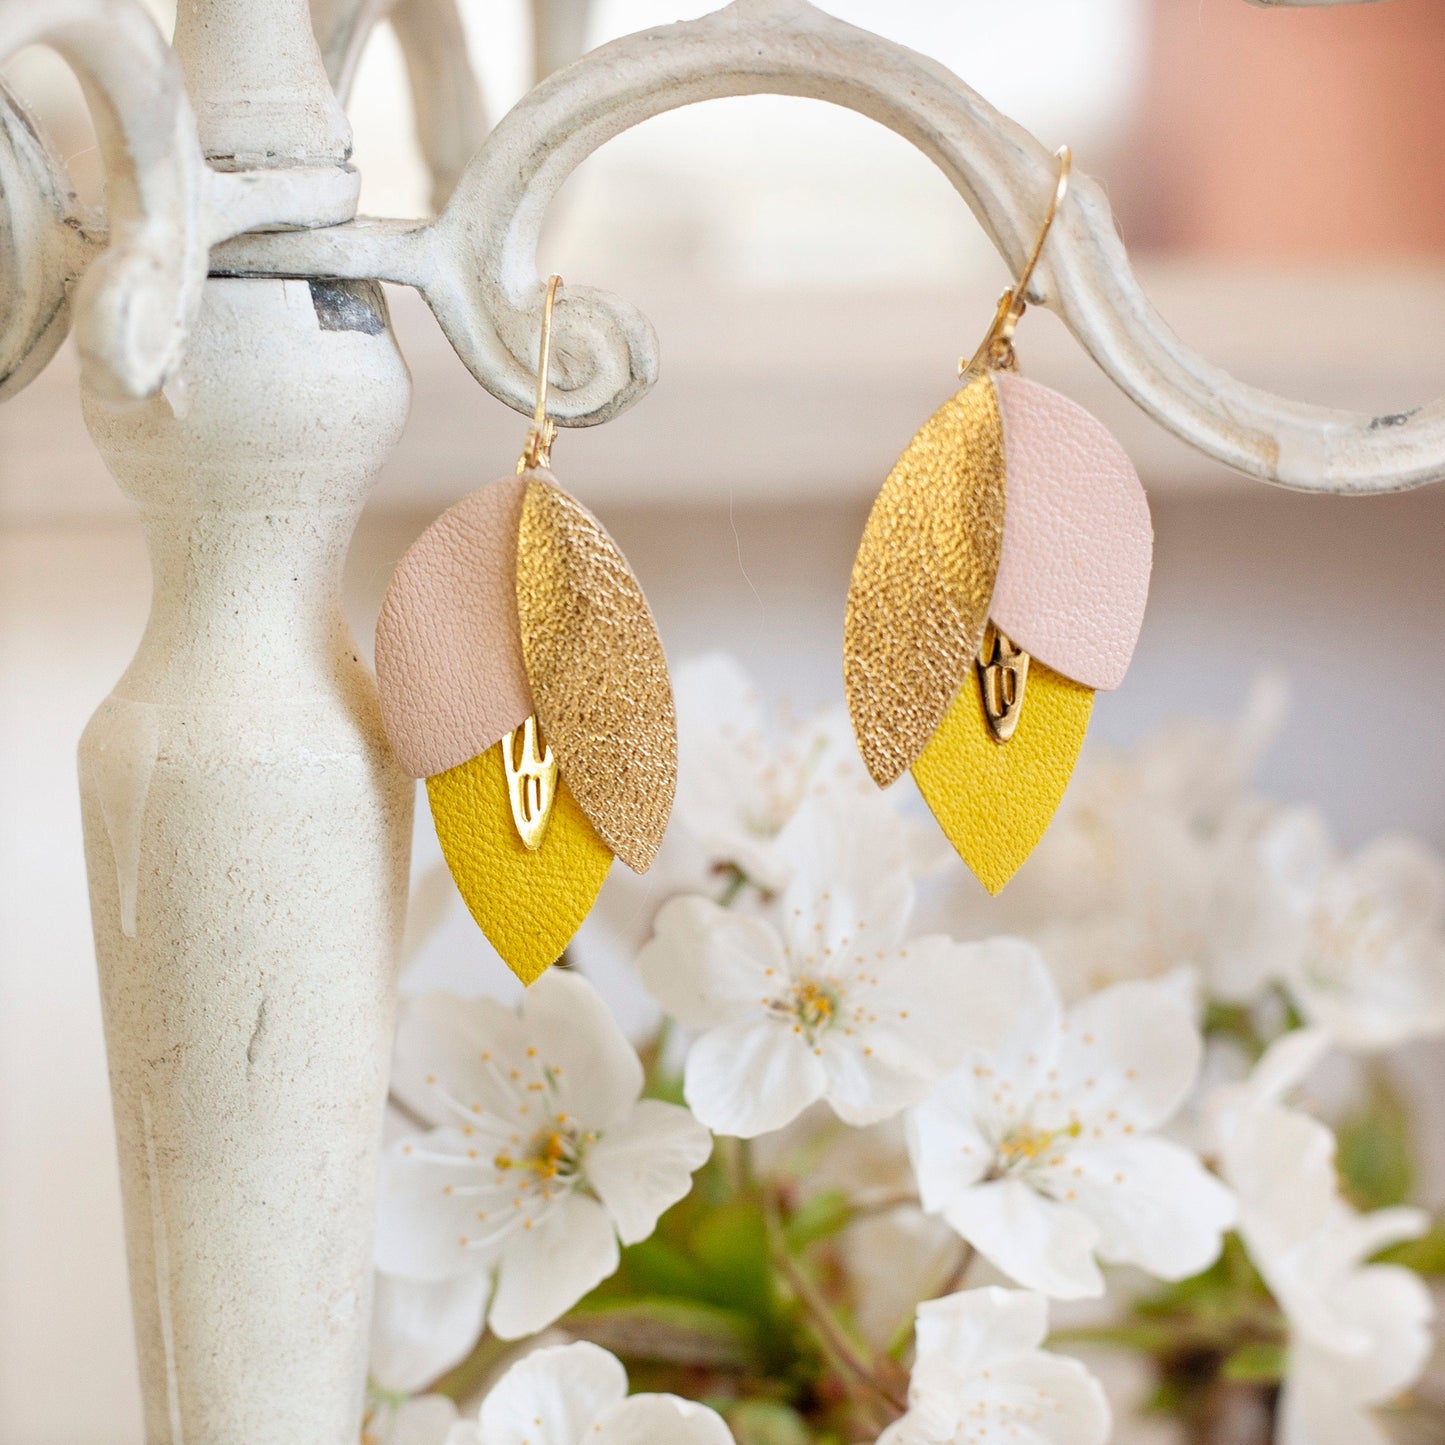 Flower petal earrings in yellow and rose gold-plated leather